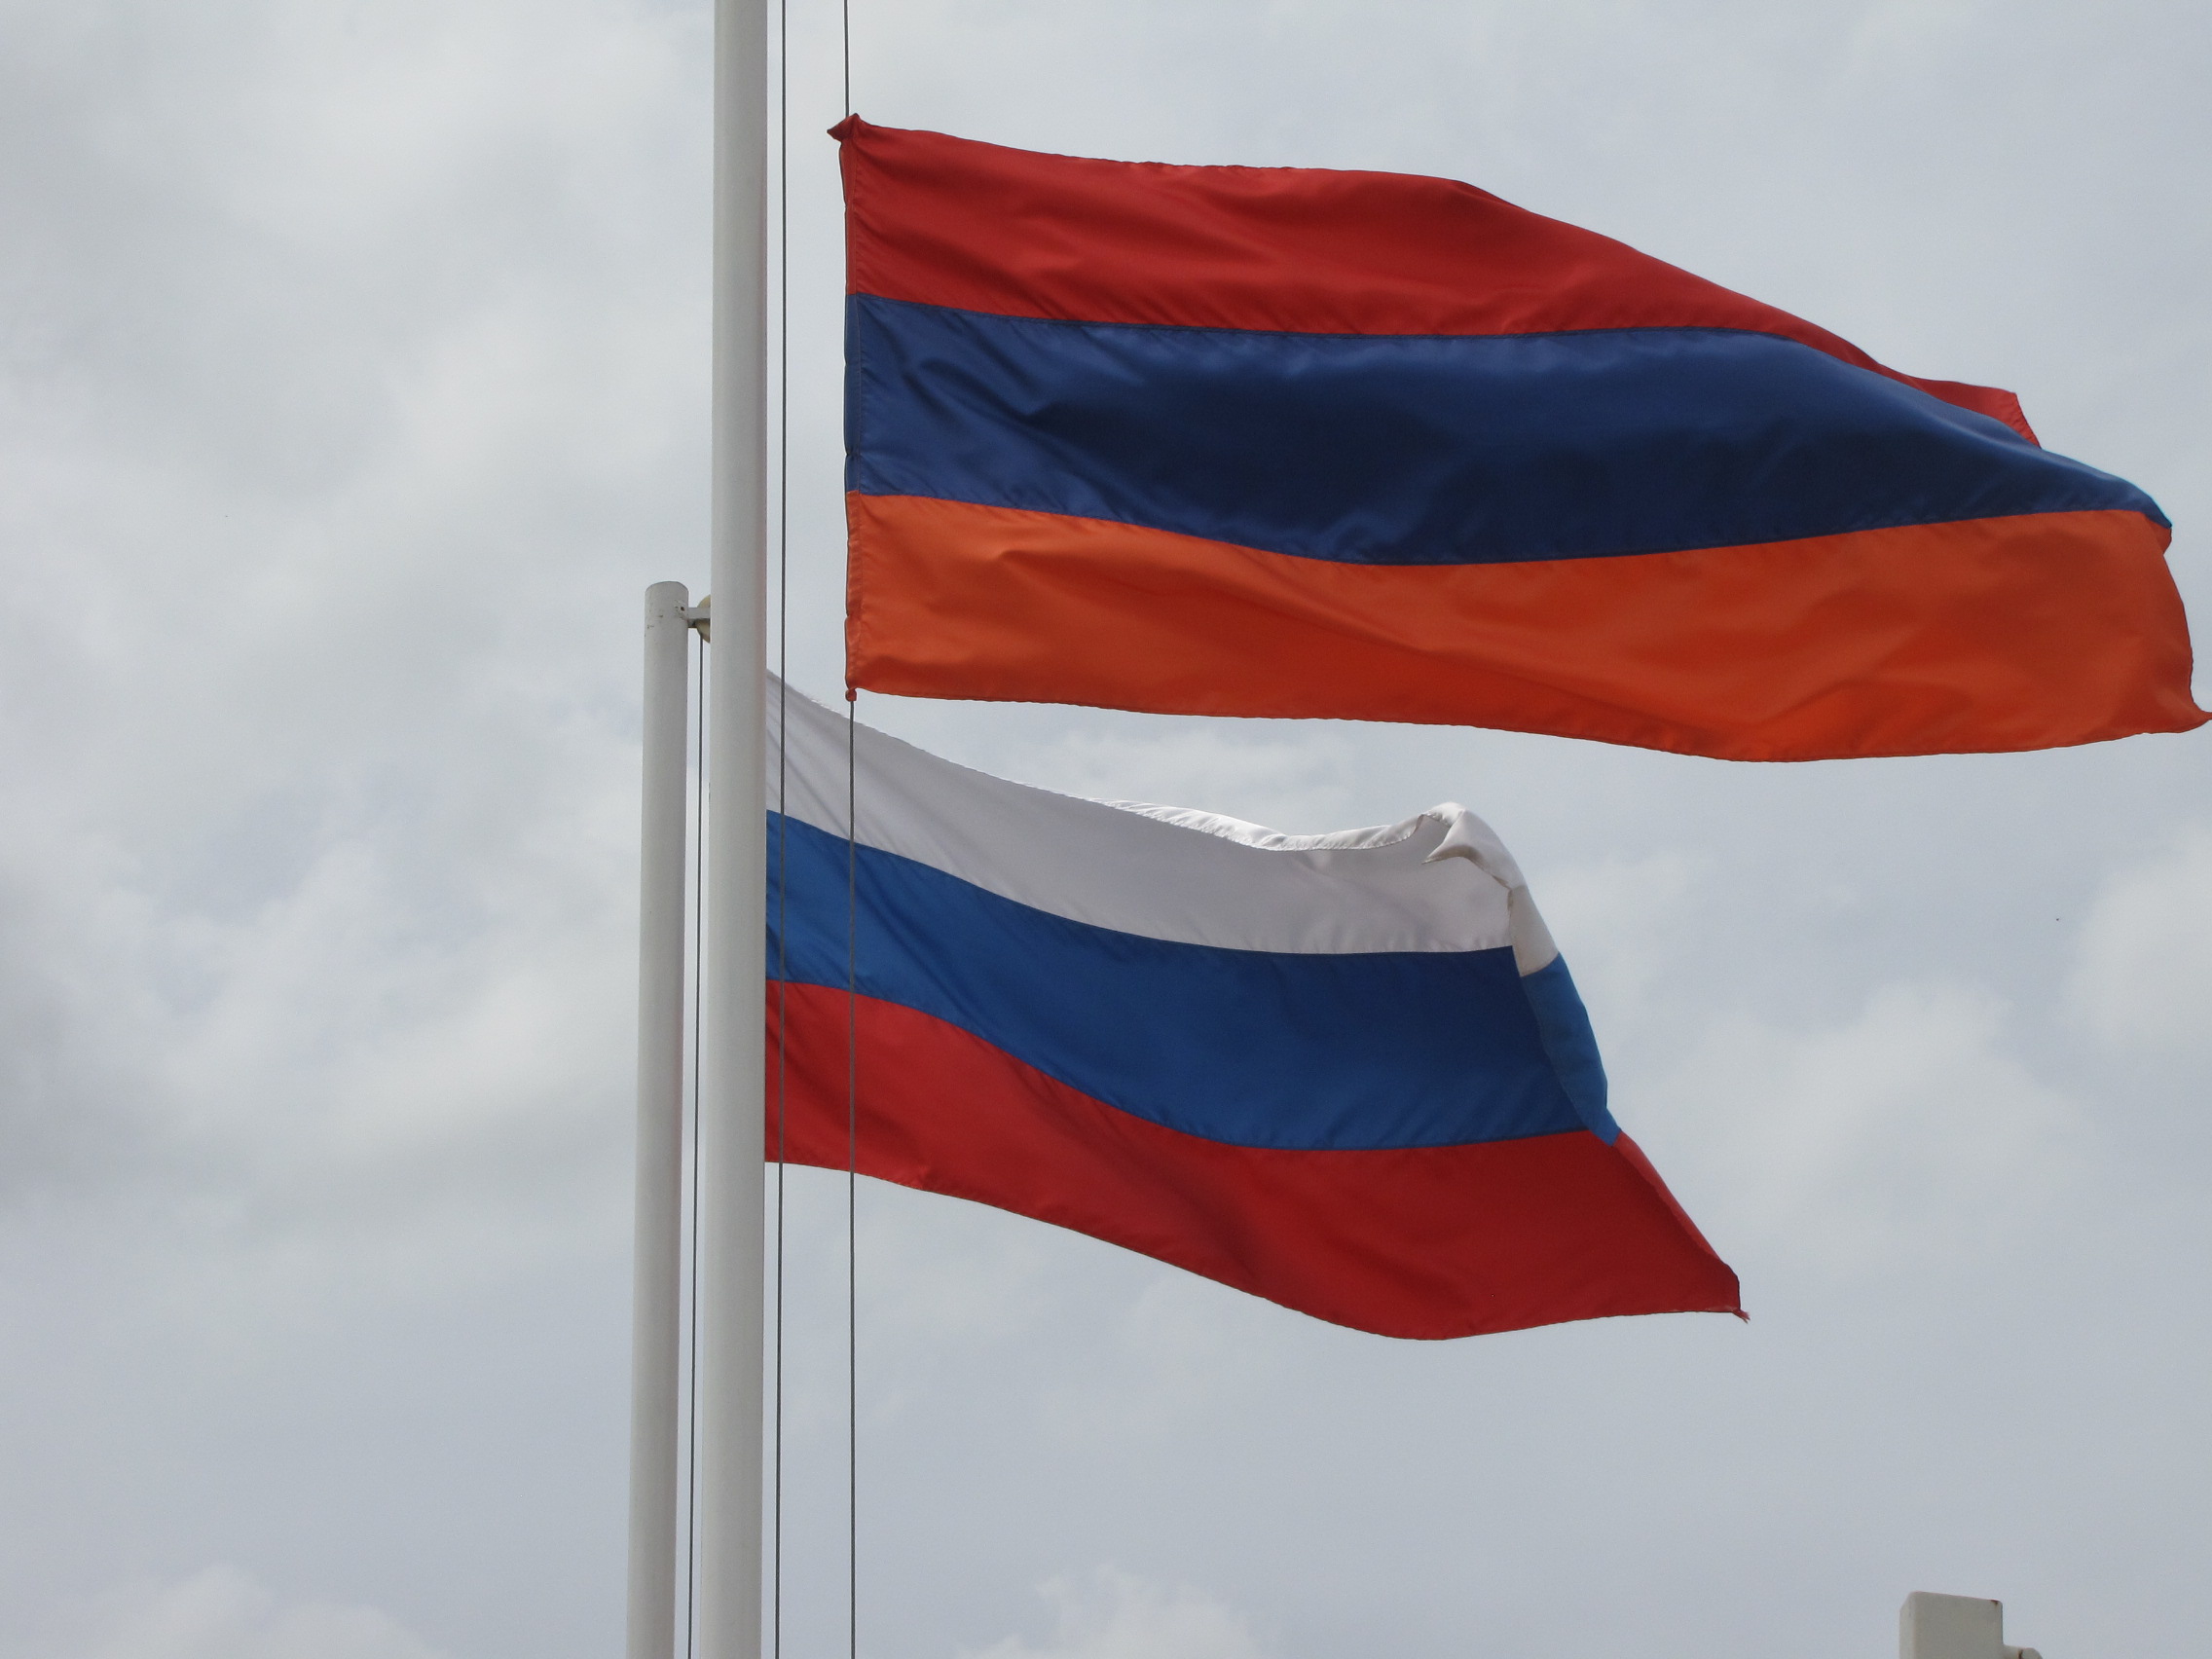 Armenian, Russian defense ministers discuss Nagorno-Karabakh after flare-up